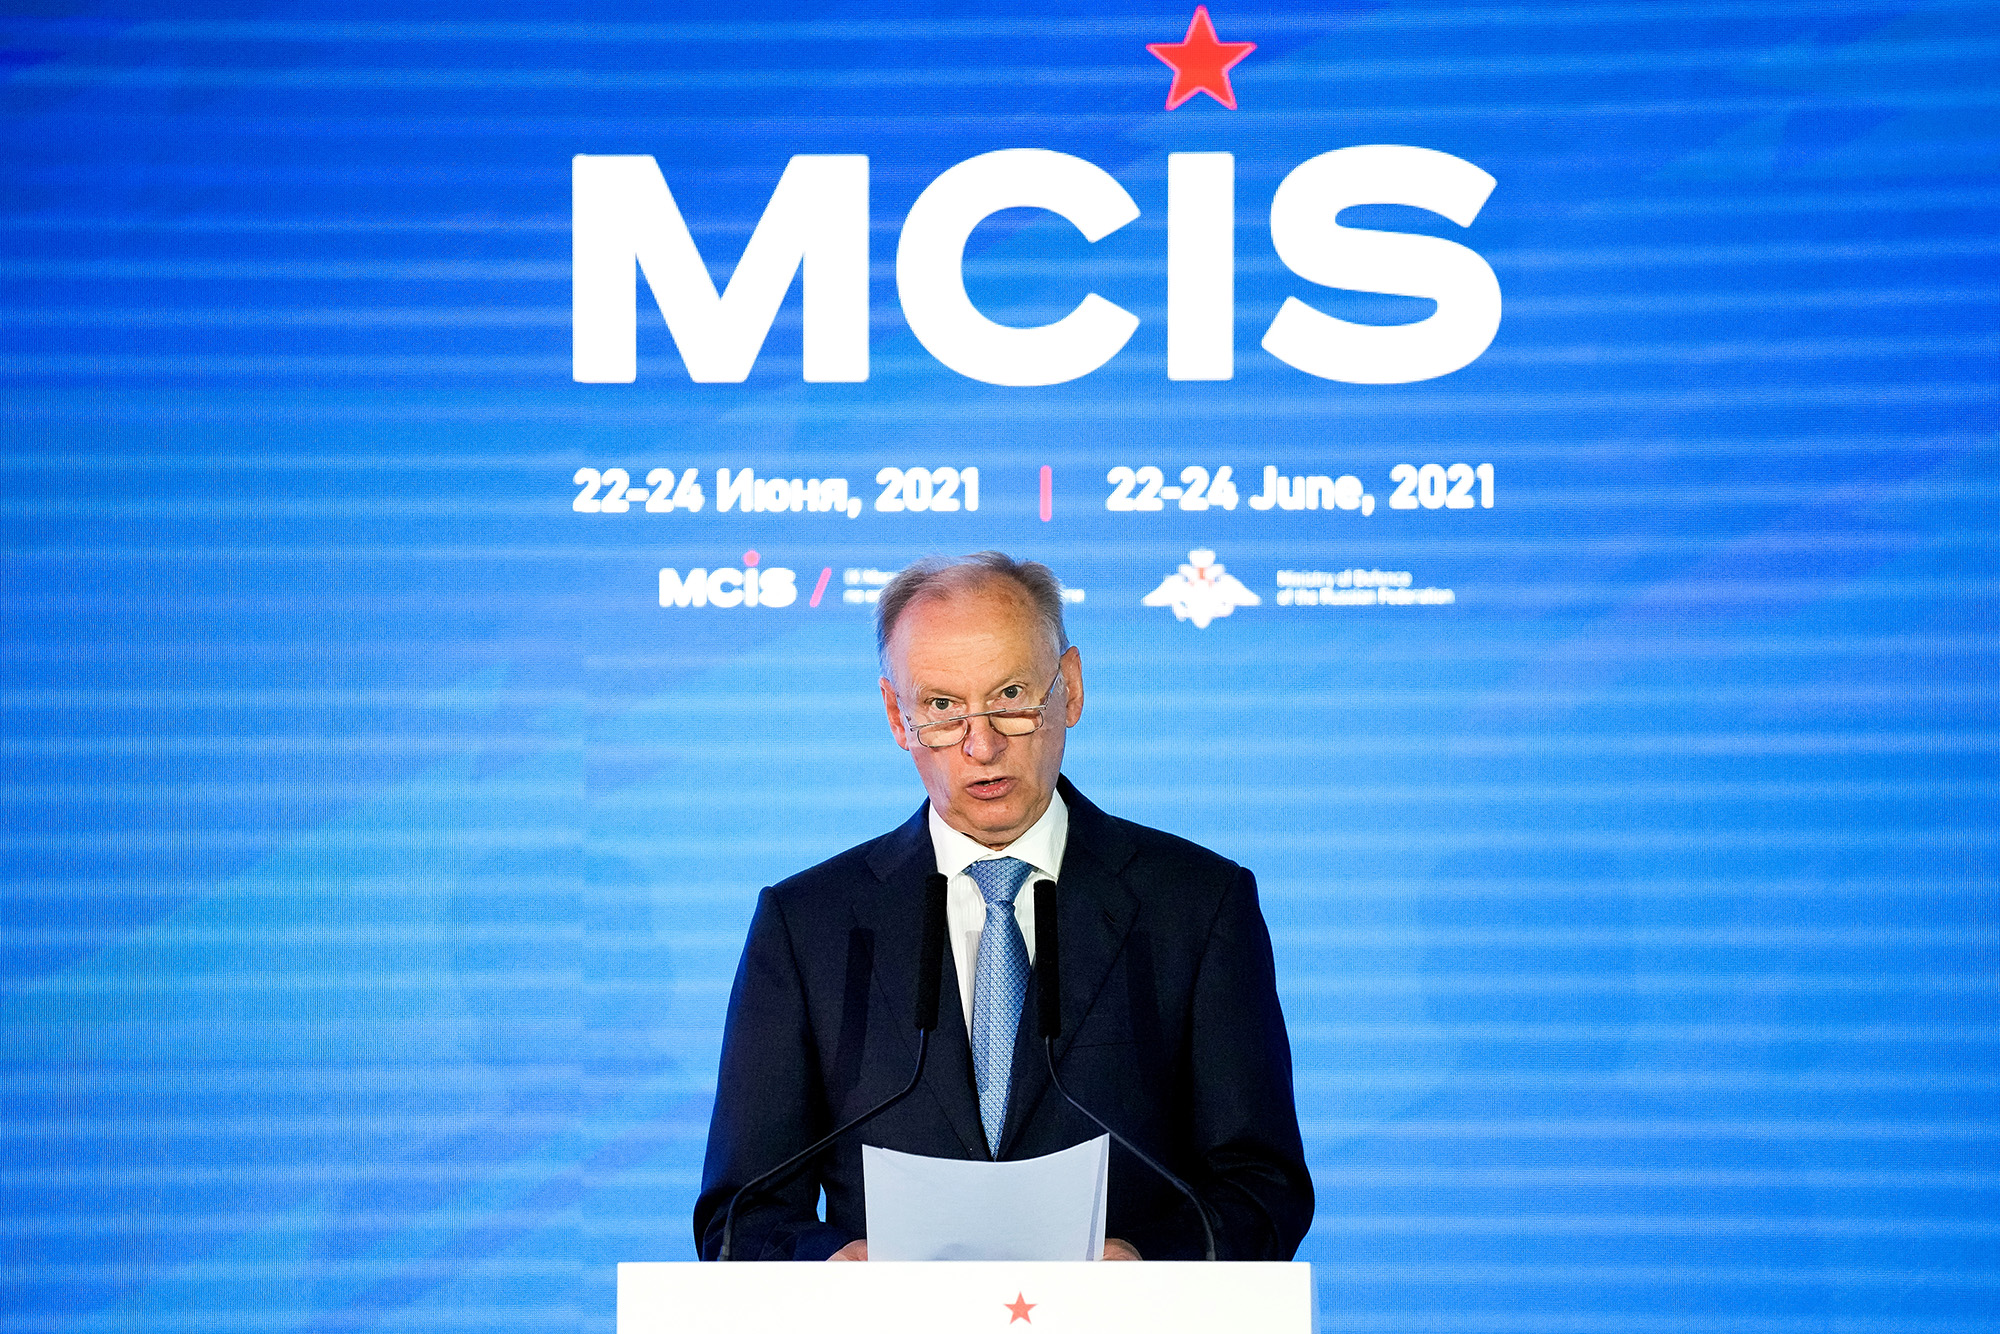 Russia's security council secretary Nikolai Patrushev delivers his speech at the IX Moscow conference on international security in Moscow, Russia, on June 24, 2021. 